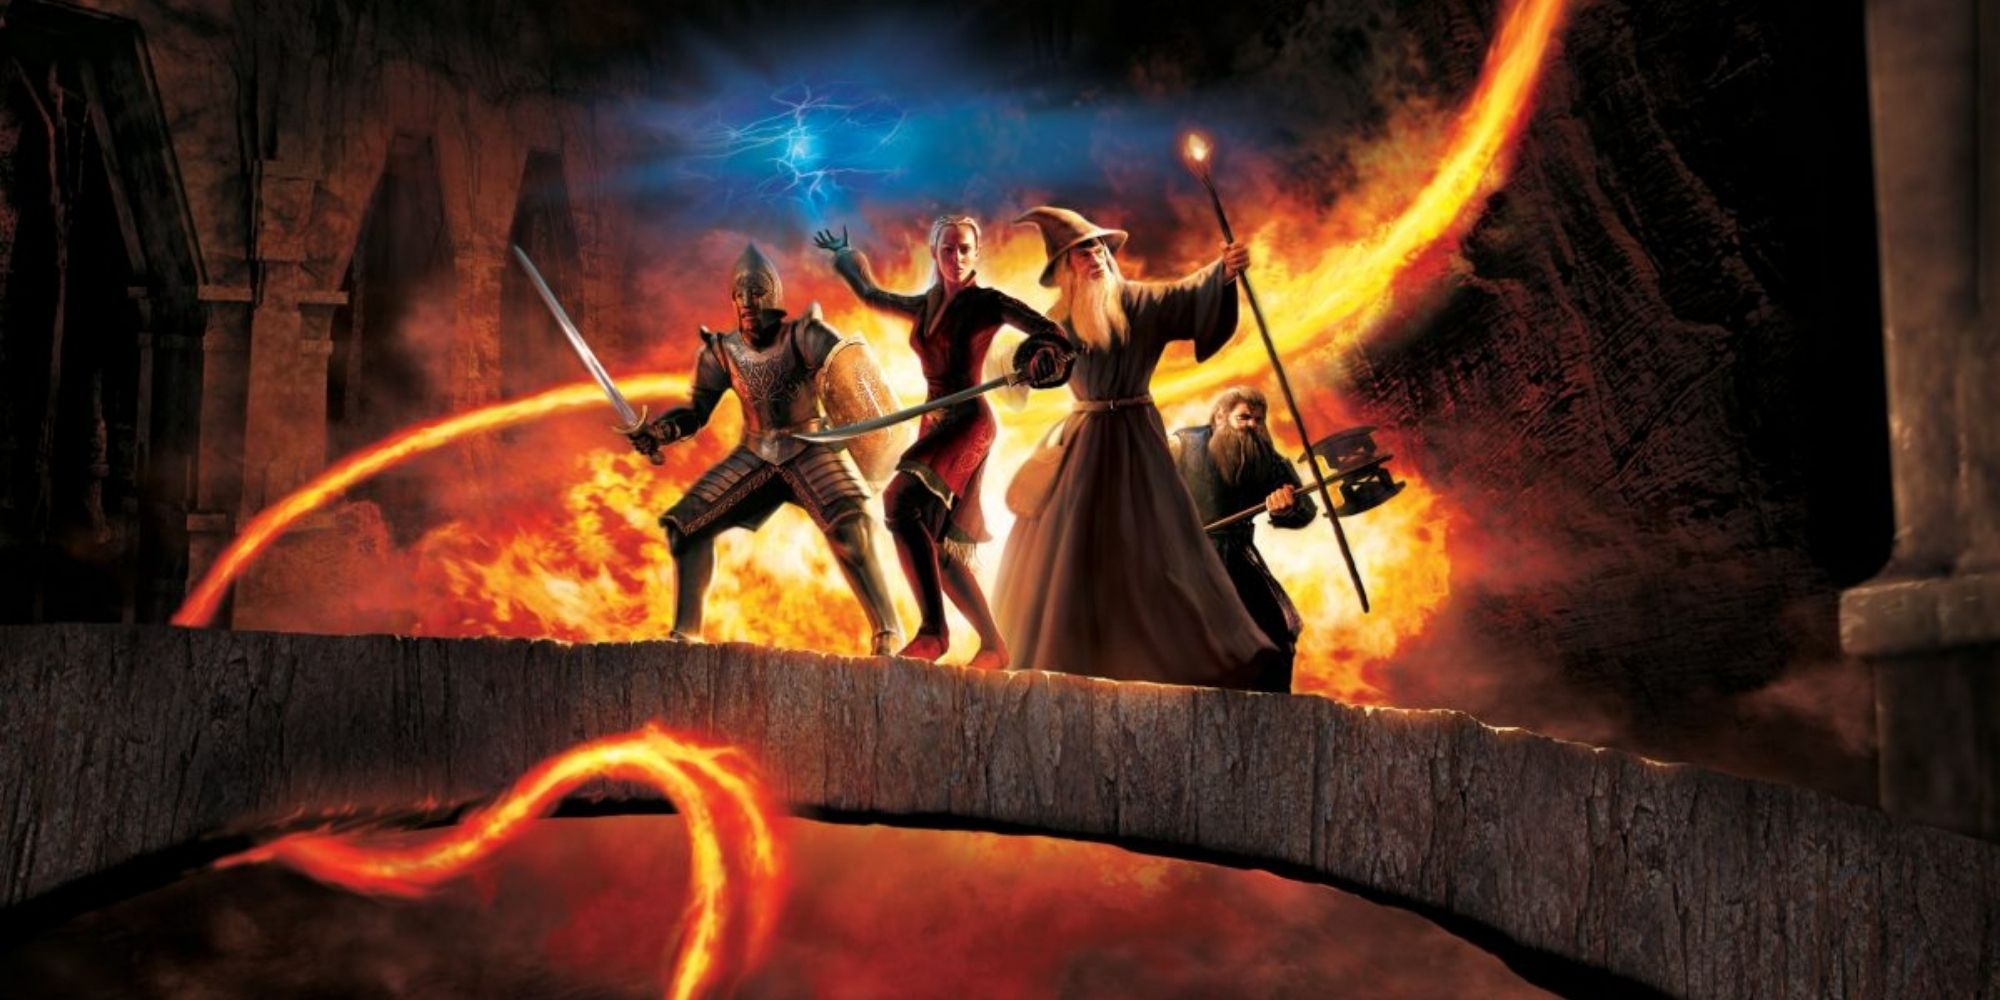 Promotional game art for The Lord of the Rings The Third Age